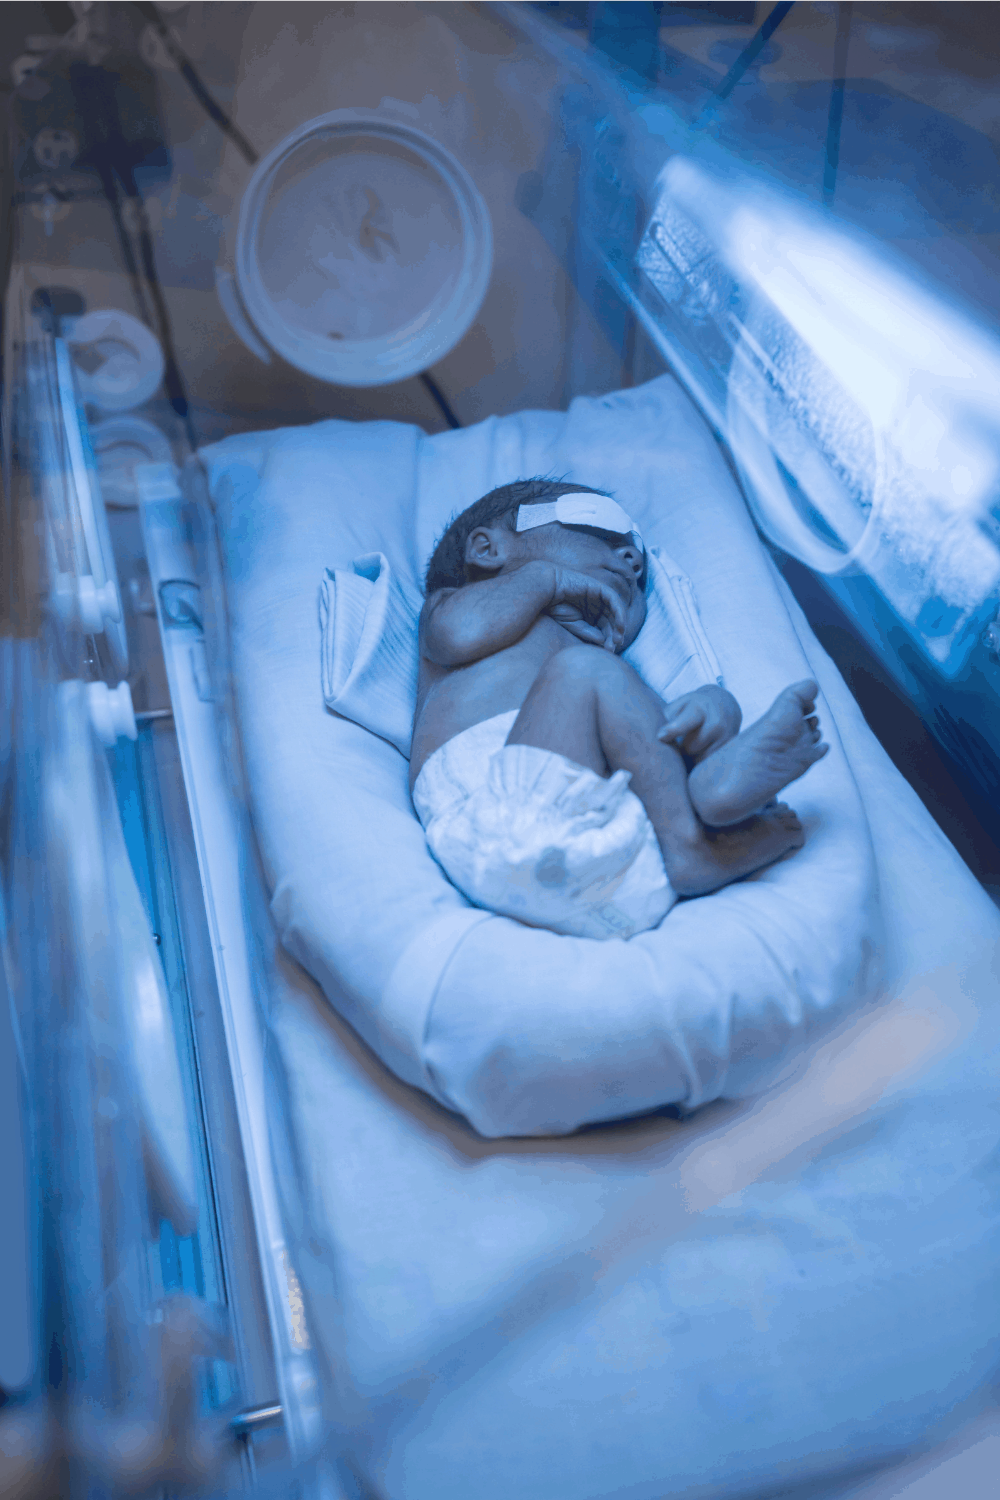 Jaundice In Newborns: Why it Happens and How it is Treated - Swaddles n